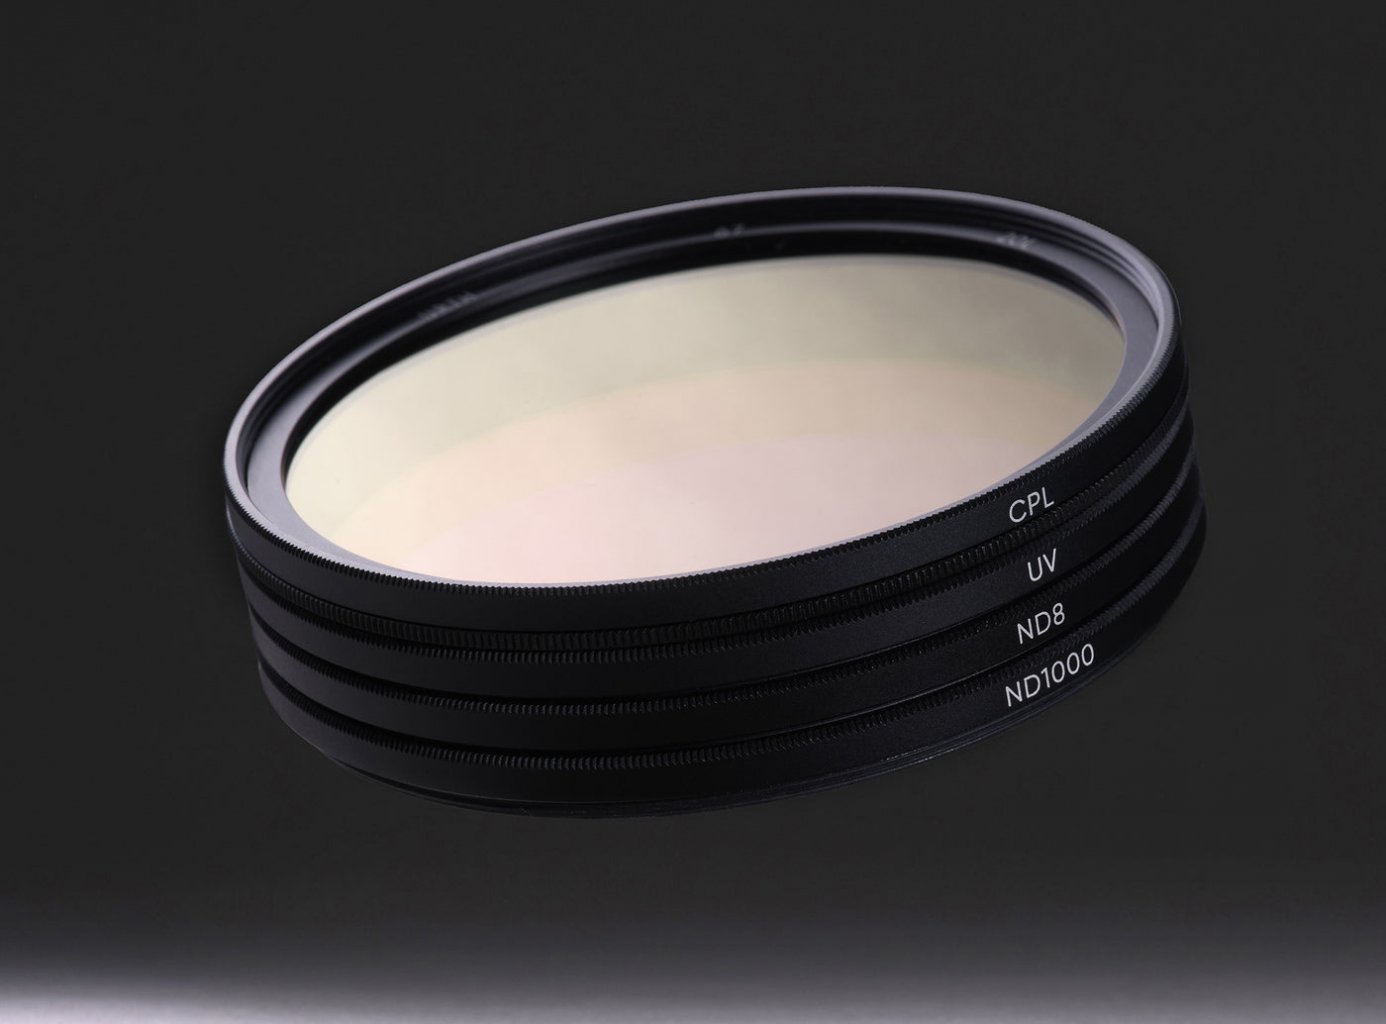 Photo 2 of Urth Essentials Filter Kit Plus+ – UV and ND filters set for your camera